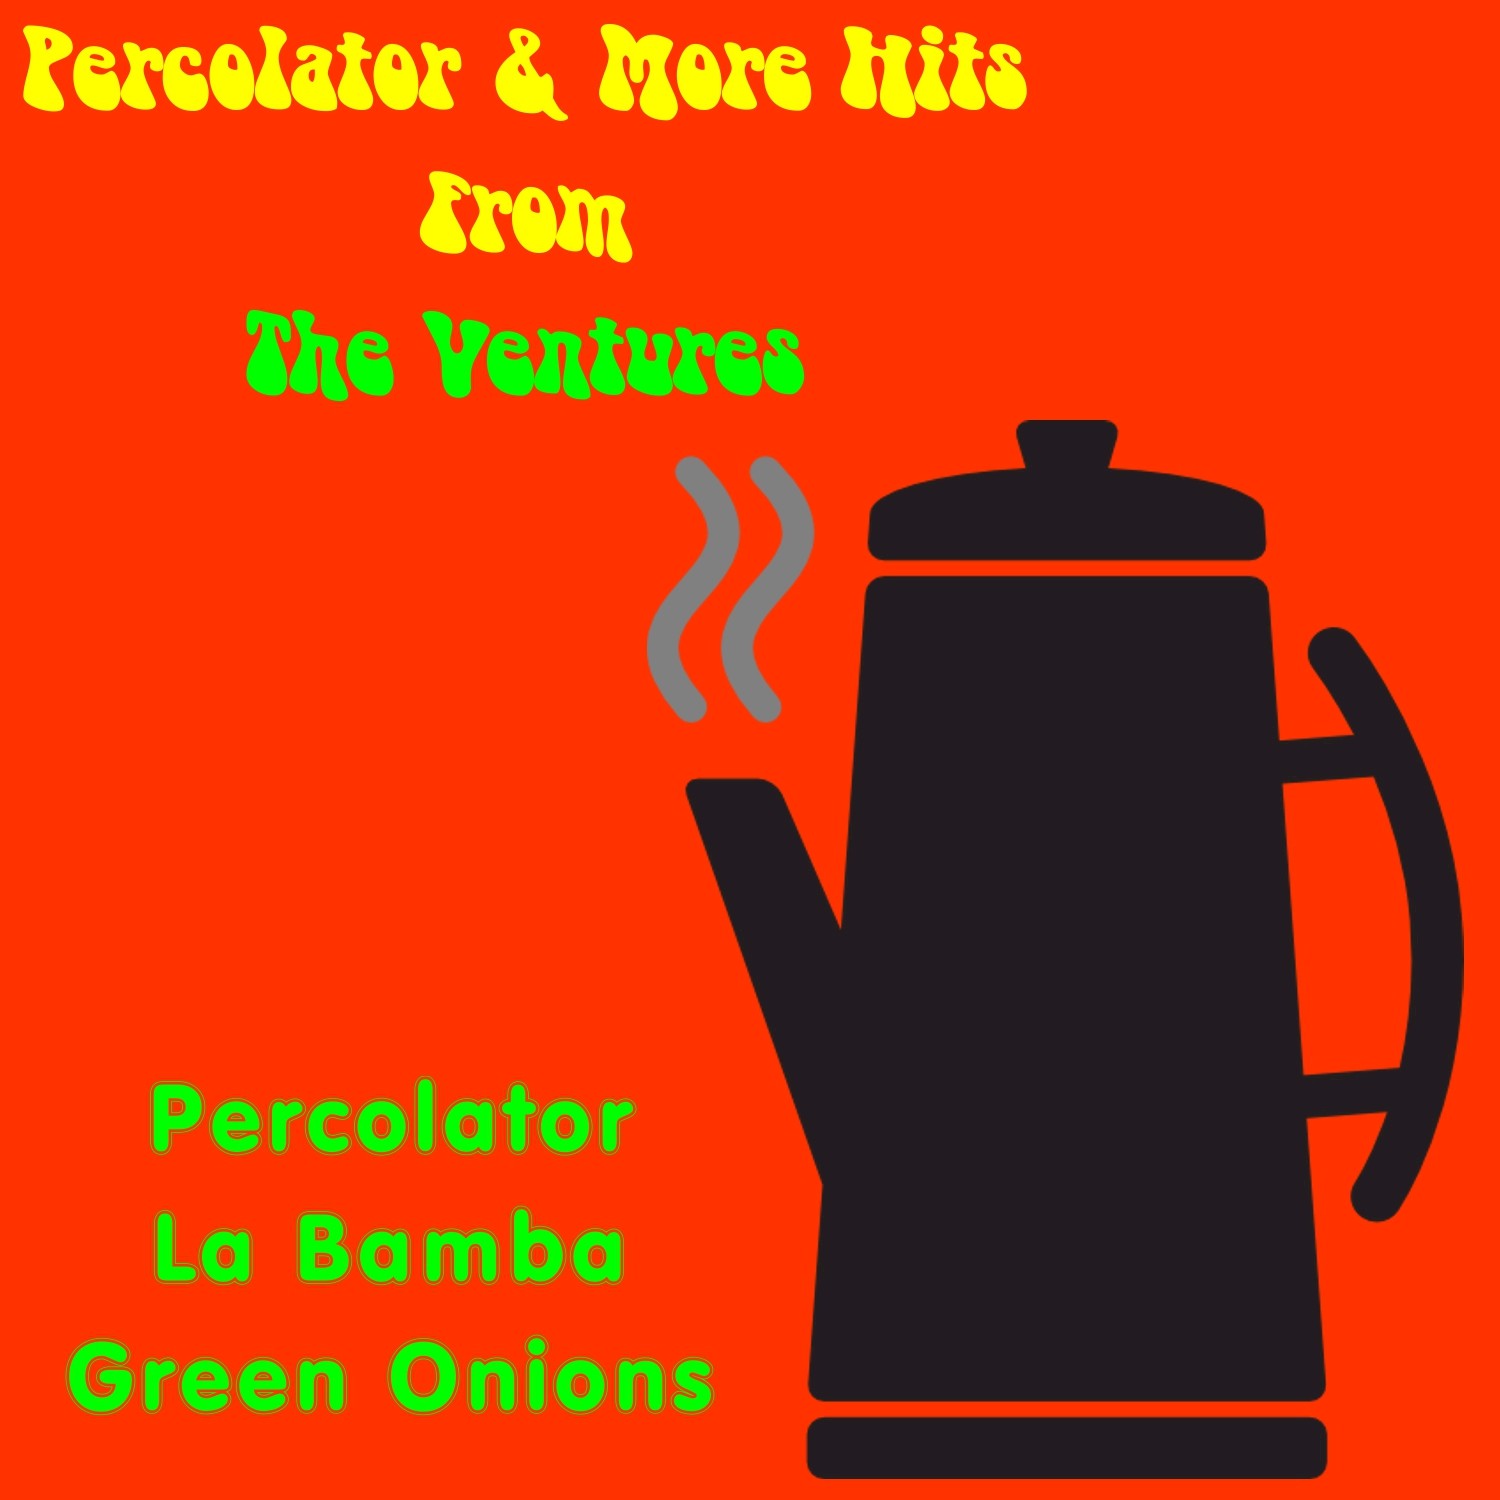 Percolator & More Hits from the Ventures